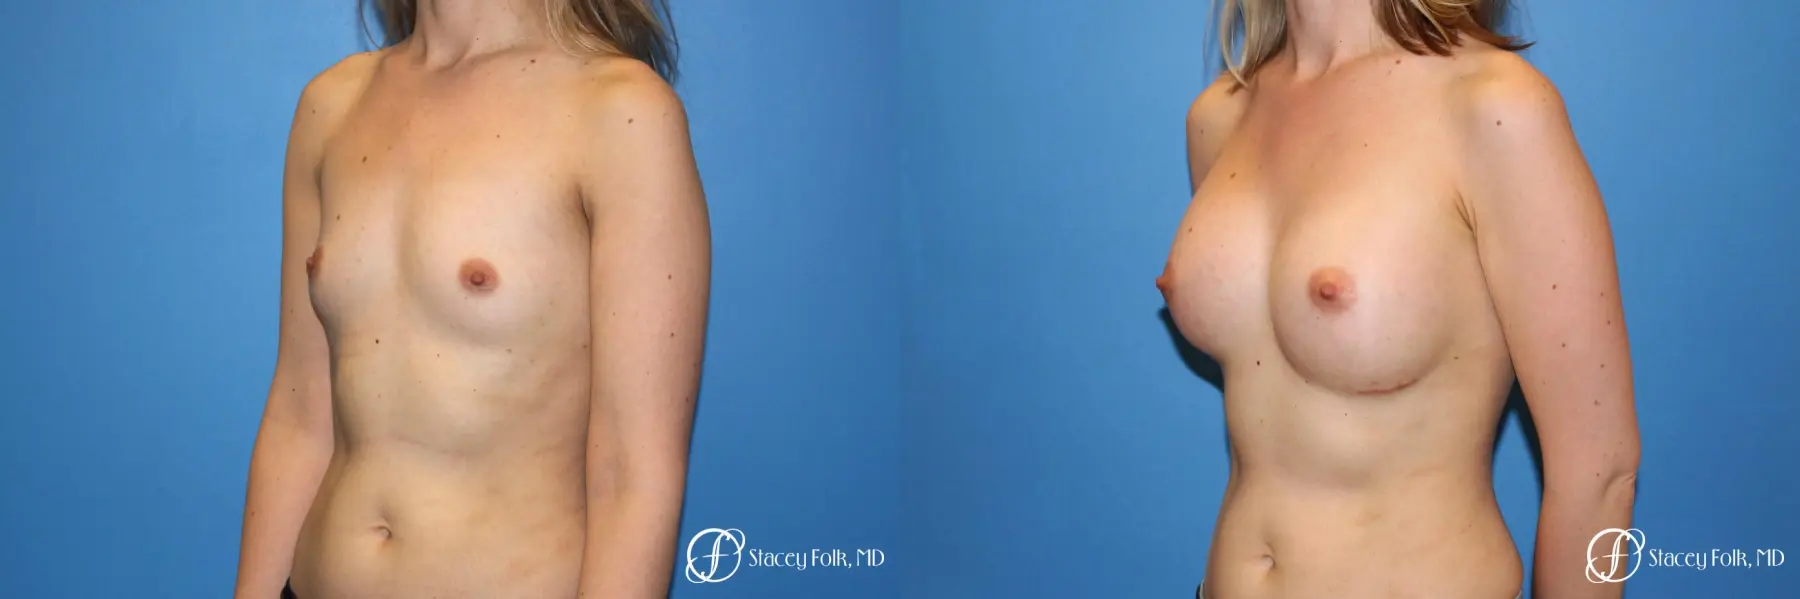 Denver Breast augmentation 7110 - Before and After 2